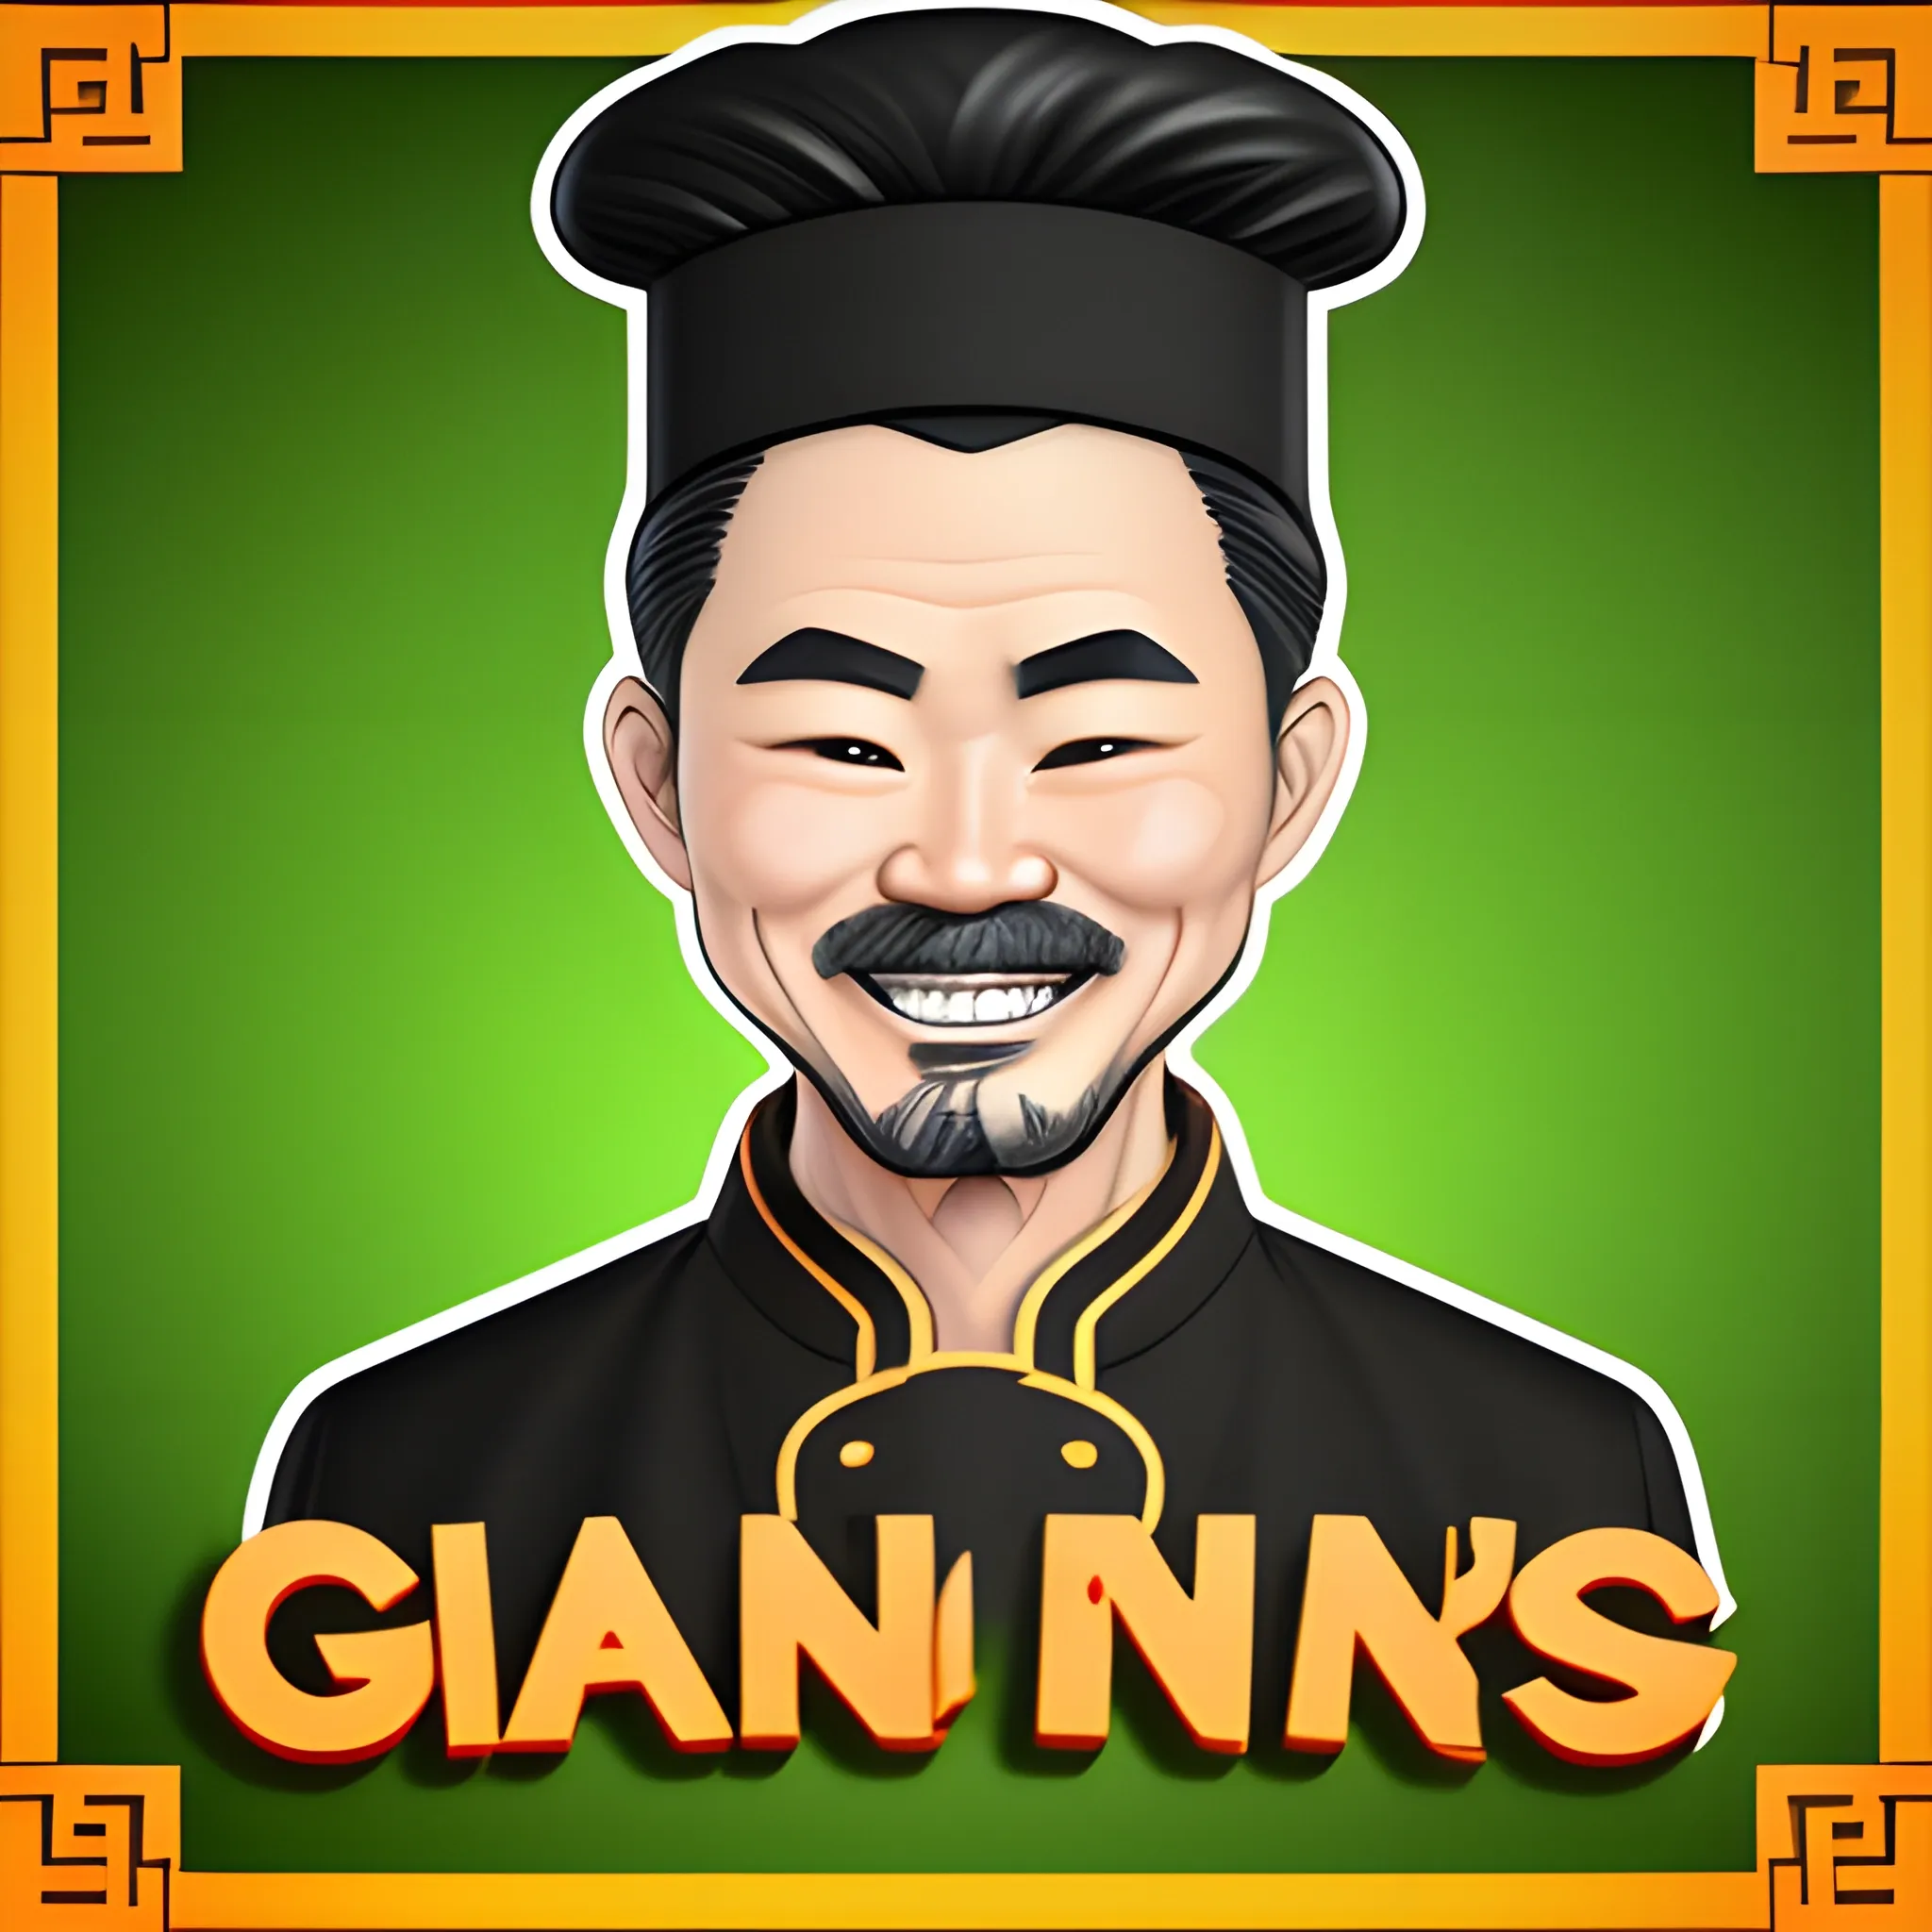 Create a unique and creative logo design for Fong’s Garden. Male chef iconic, wear chef hat, banner text is Fong's Garden place under the logo of head, Black and brown hair, smaile face but no see the teeth. more chinese style overall style. add some food dished around the logo, 3D, Cartoon, Cartoon, 3D